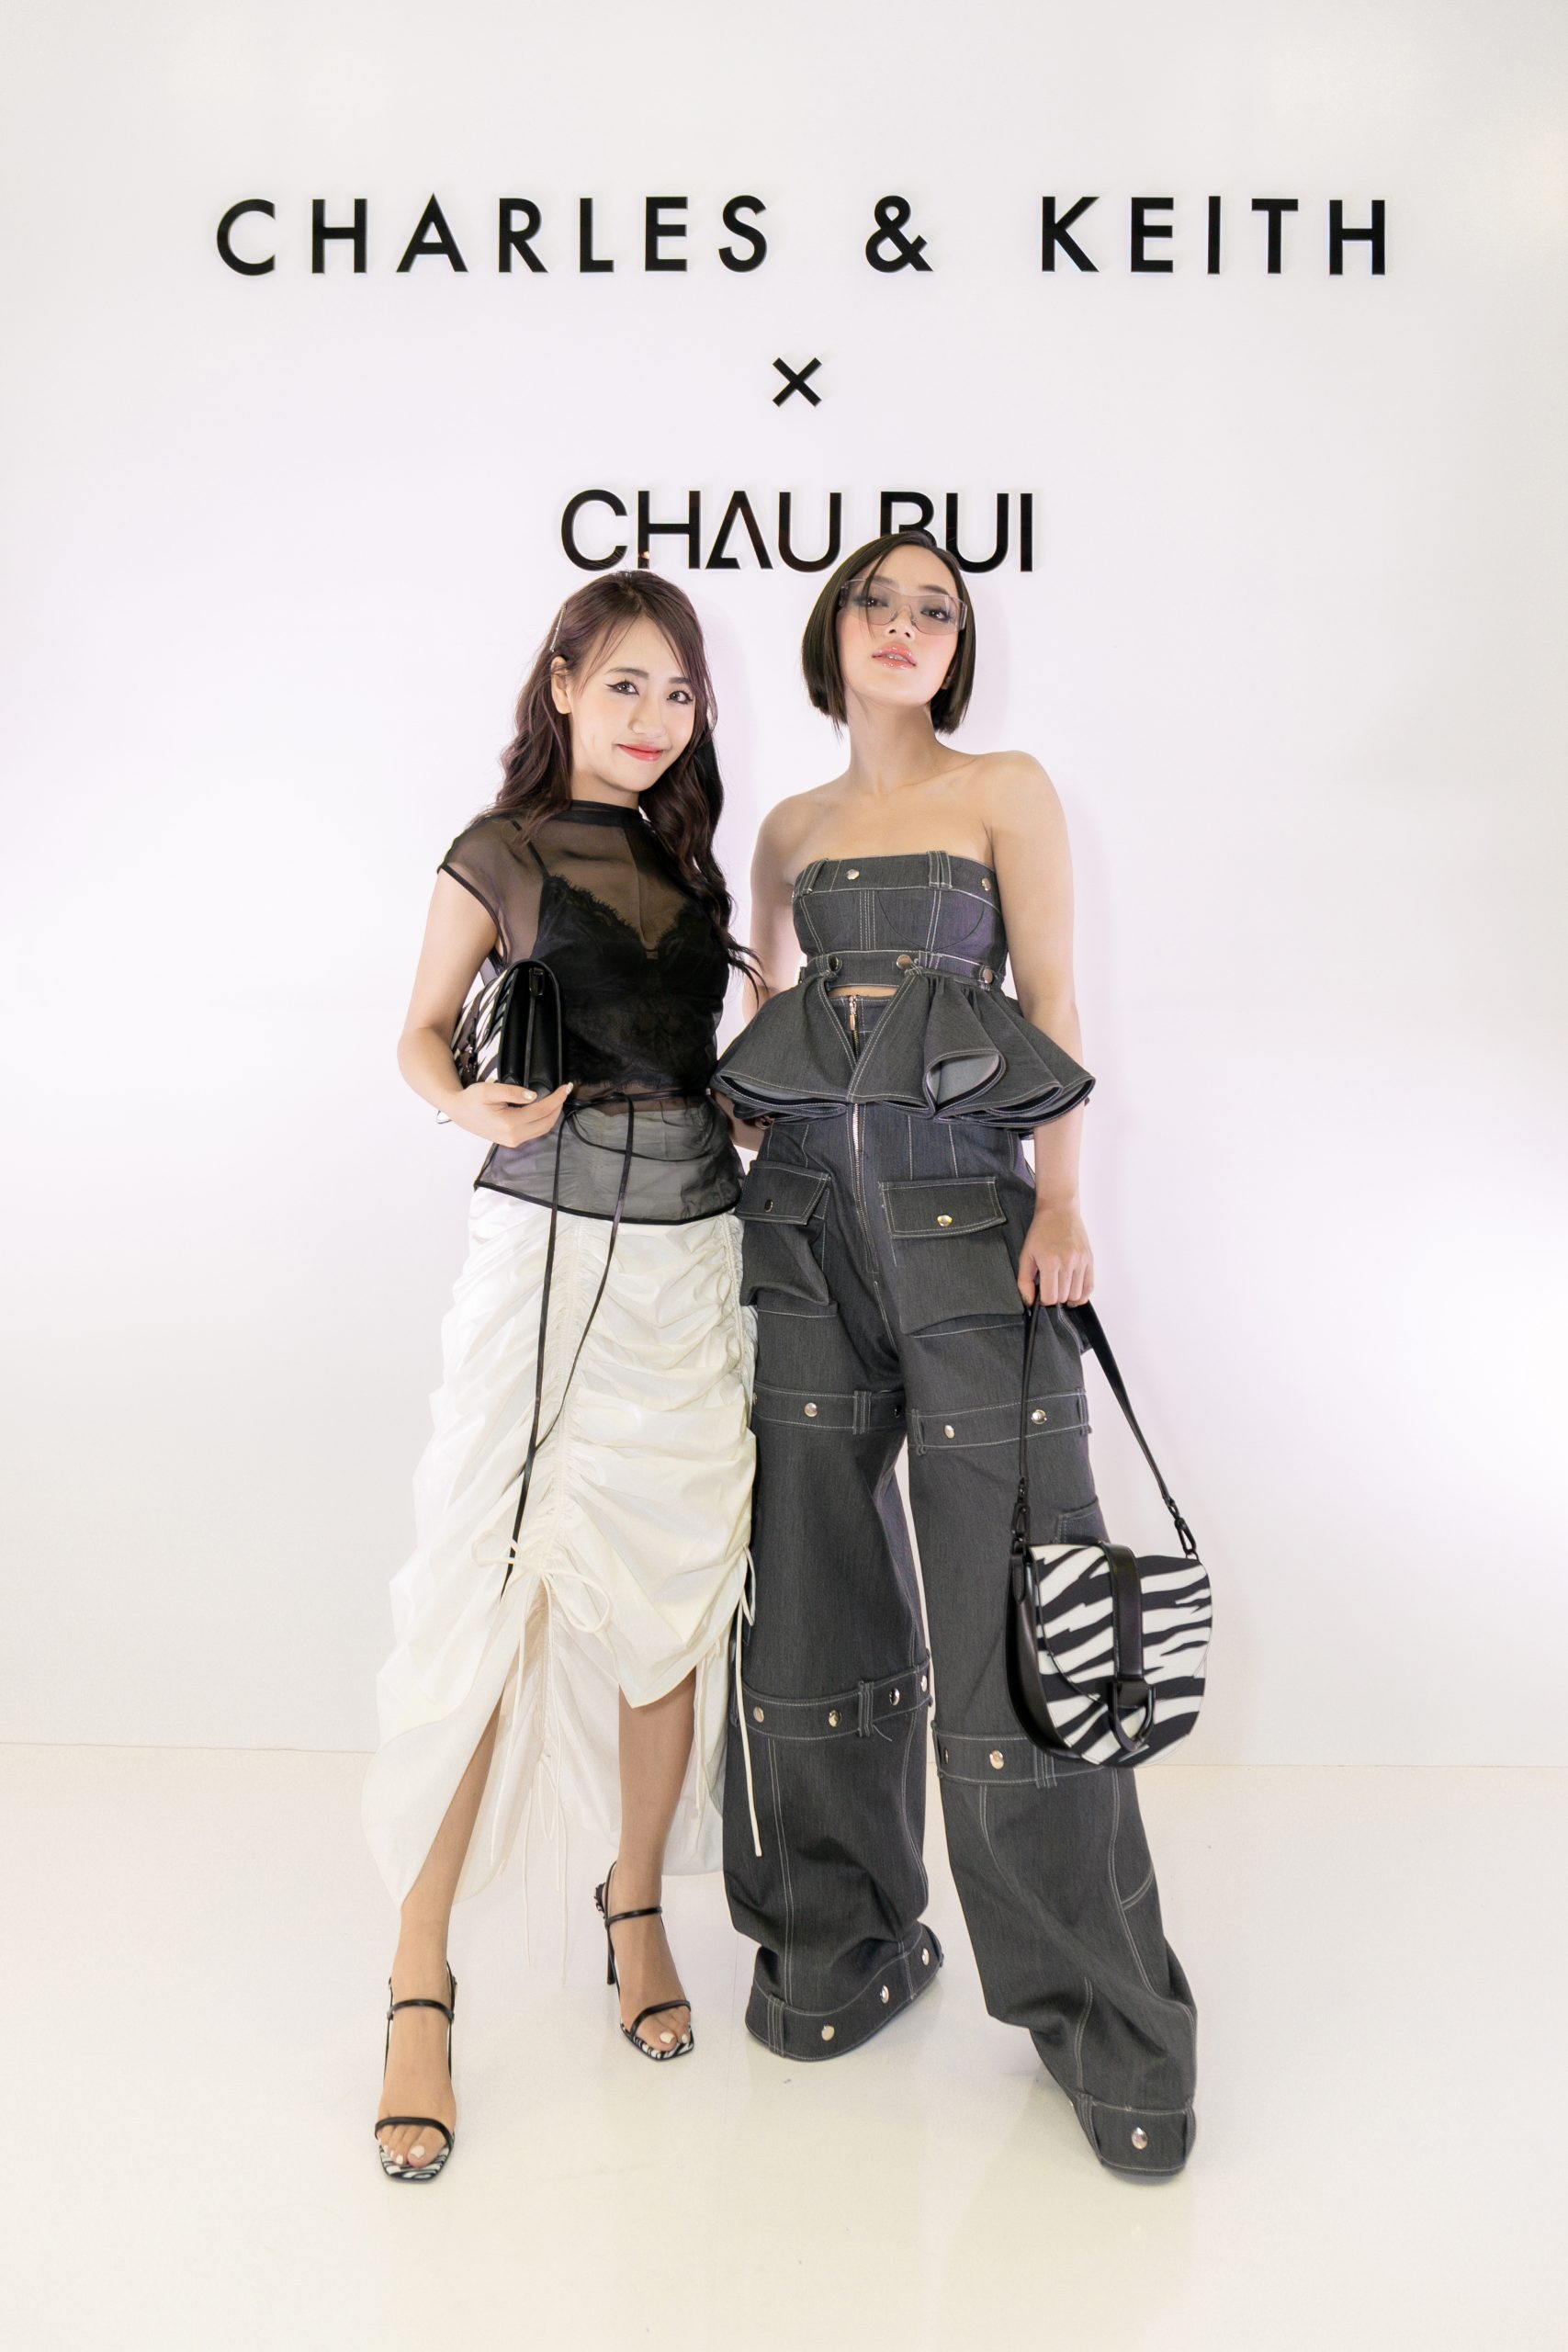 CHARLES & KEITH Collaborated With Chau Bui To Launch An Exclusive